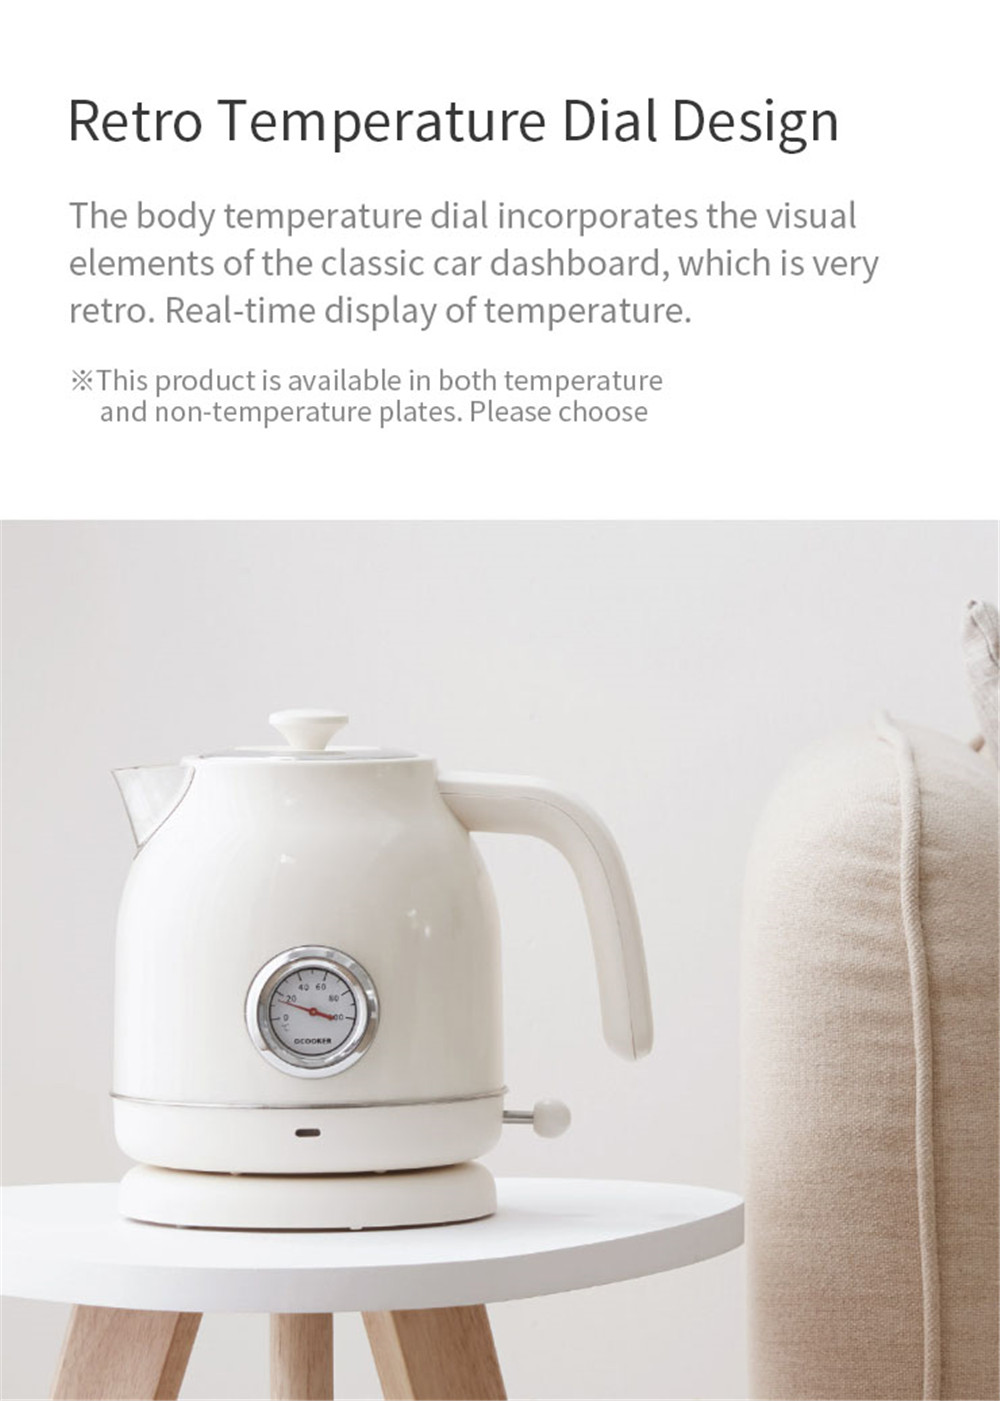 QCOOKER 1.7L / 1800W Retro Electric Kettle with Watch Thermometer Display from Xiaomi